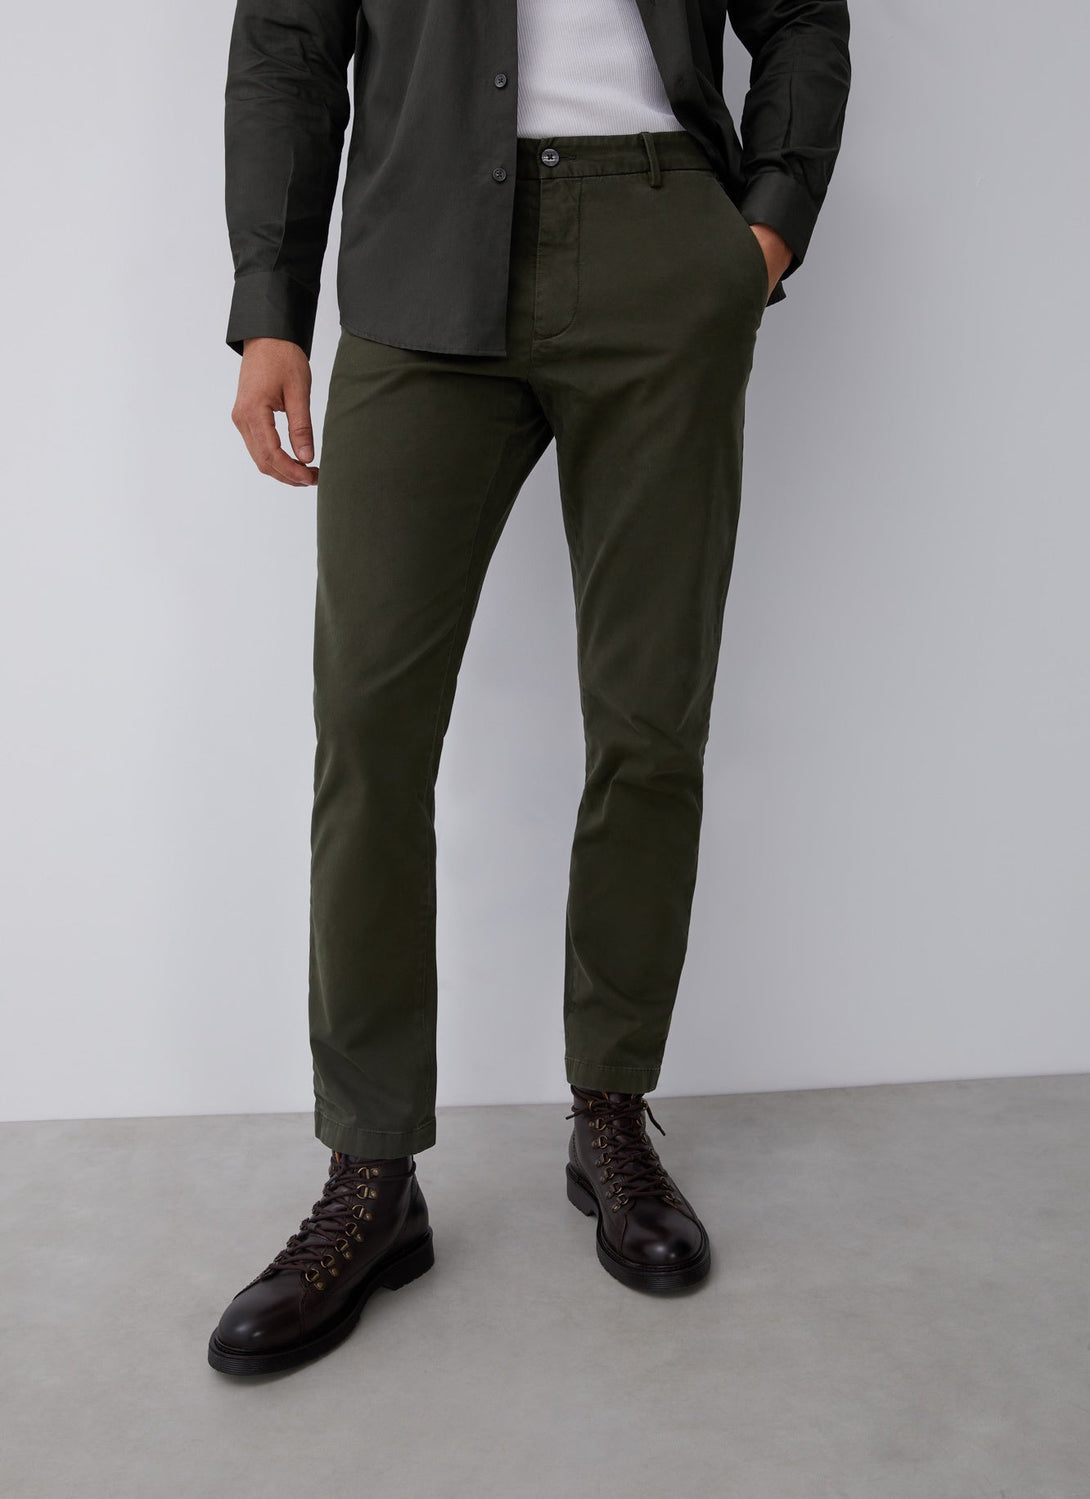 Men Trousers | Green Elastic Cotton Chino Trousers by Spanish designer Adolfo Dominguez